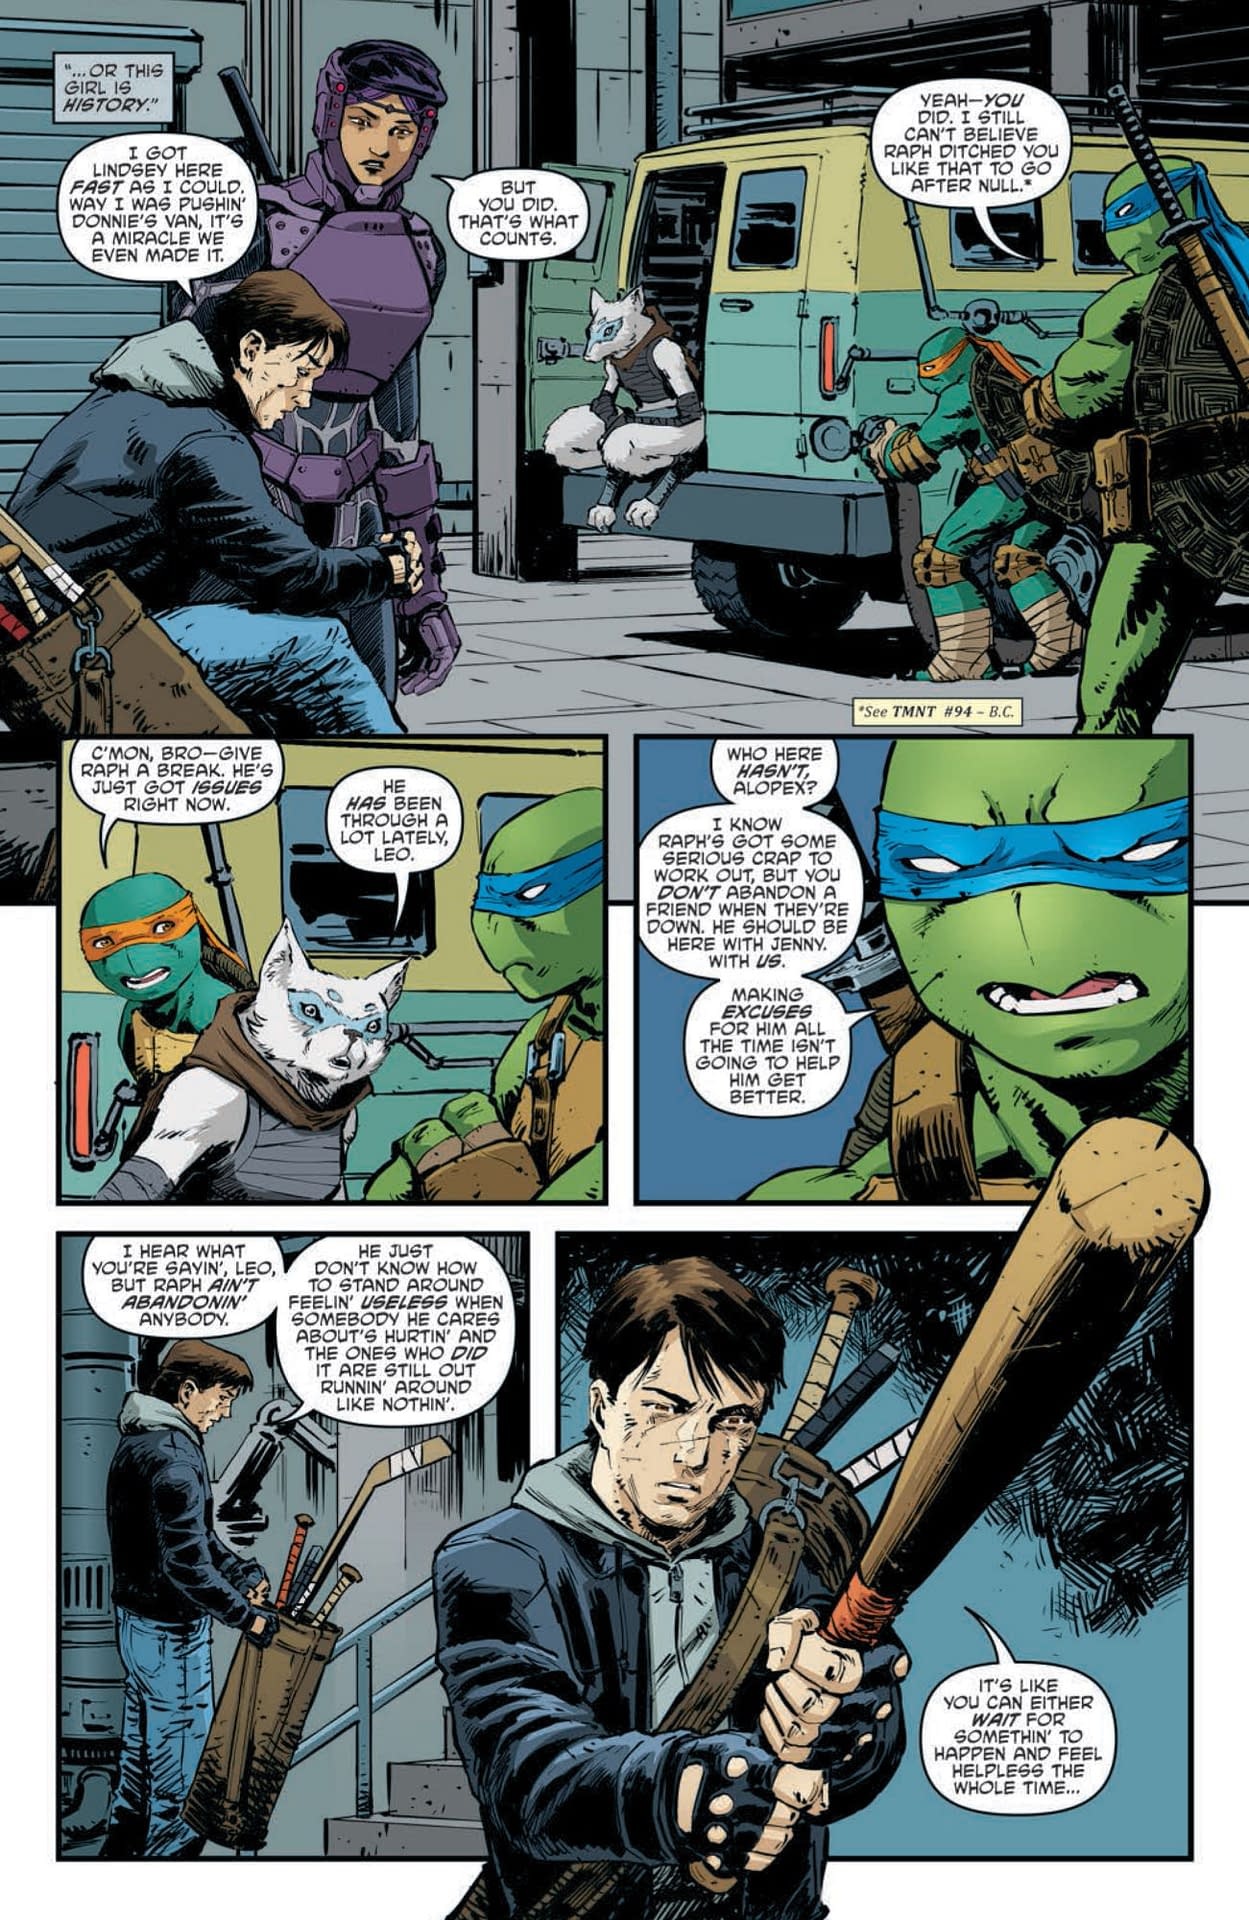 The State of the American Healthcare Industry in TMNT #95